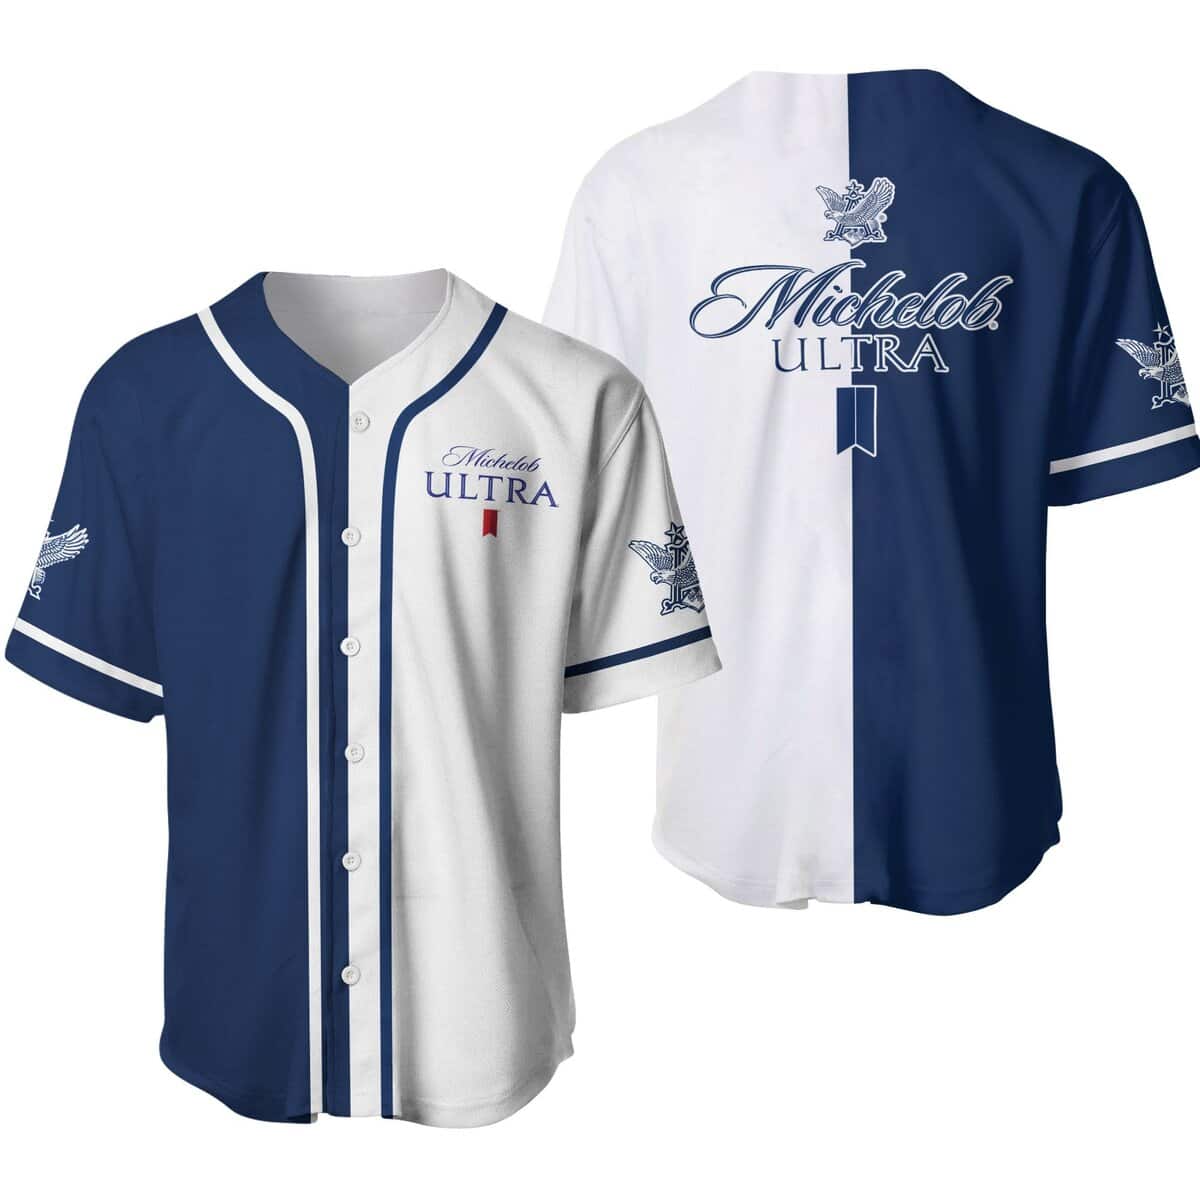 Michelob Ultra Eagle Logo Baseball Jersey for Beer Lovers HU - Hopped-Up  Tees